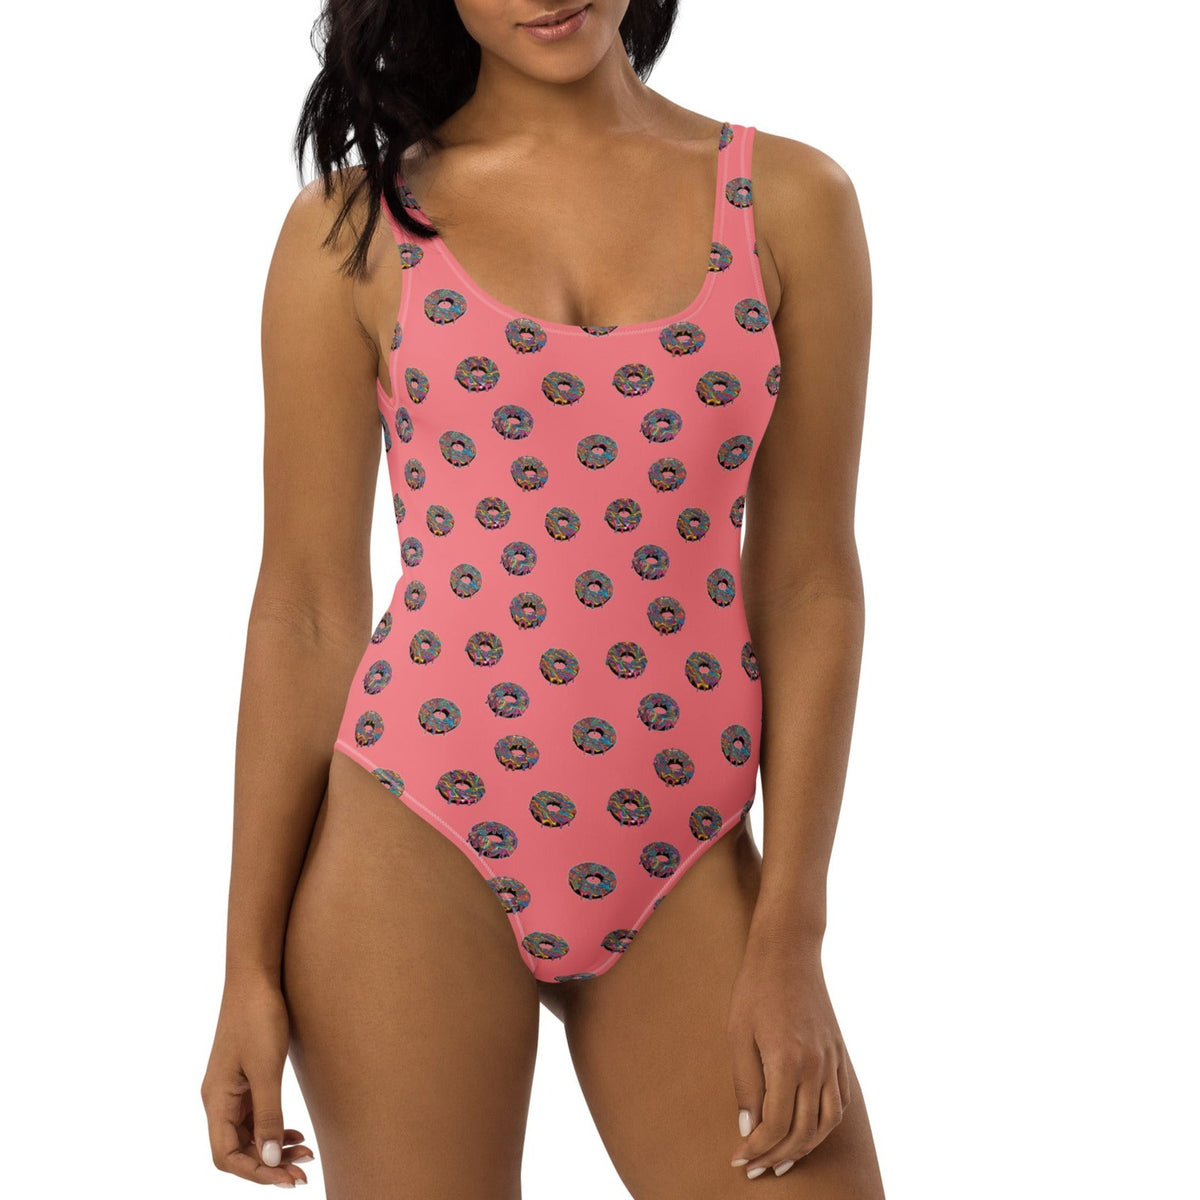 Psychedelic Donut One-Piece Swimsuit